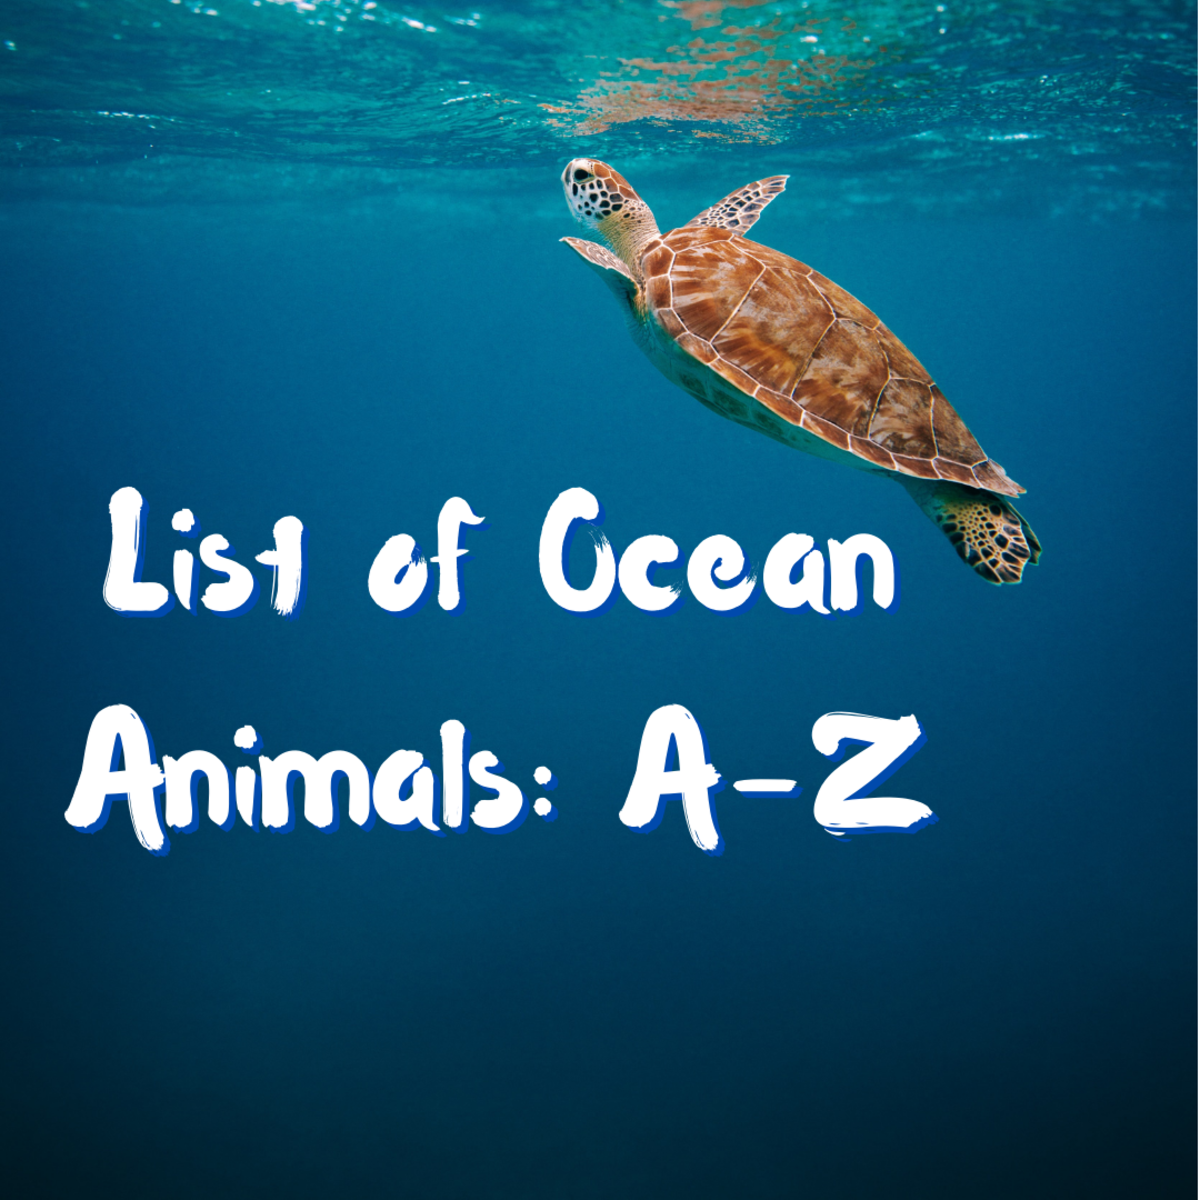 This ocean animals list provides a plethora of cool info on marine life with accompanying links. A sea turtle is pictured above. This article covers three types: Flatback, Hawksbill, and Loggerhead. Read on to discover them and many more marvels!